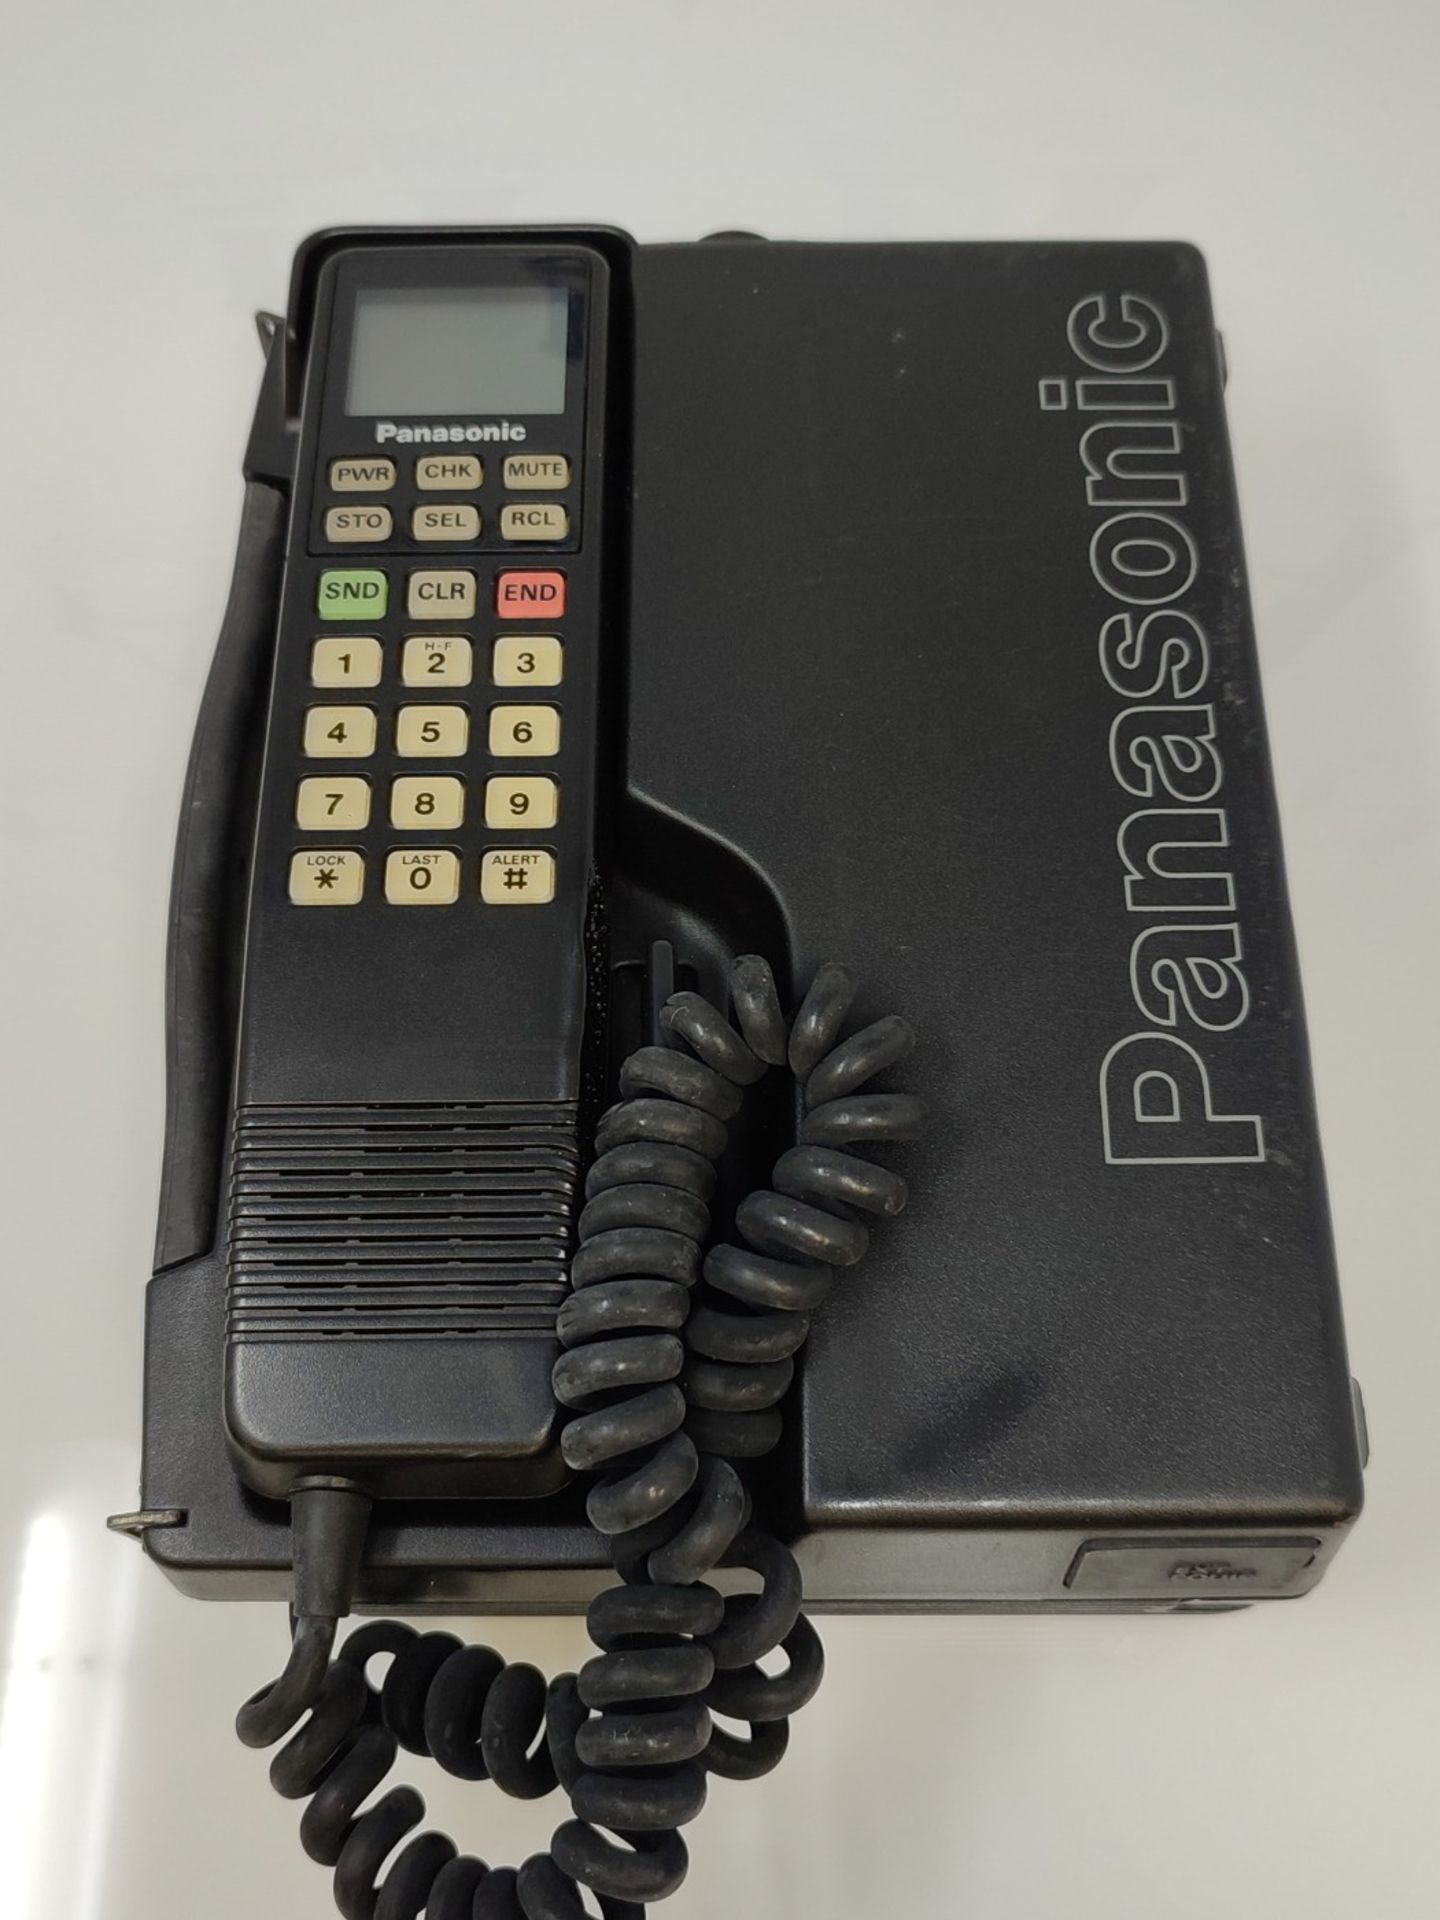 Panasonic Mobile Phone one of the 1st type EF-6151EB - Image 3 of 4